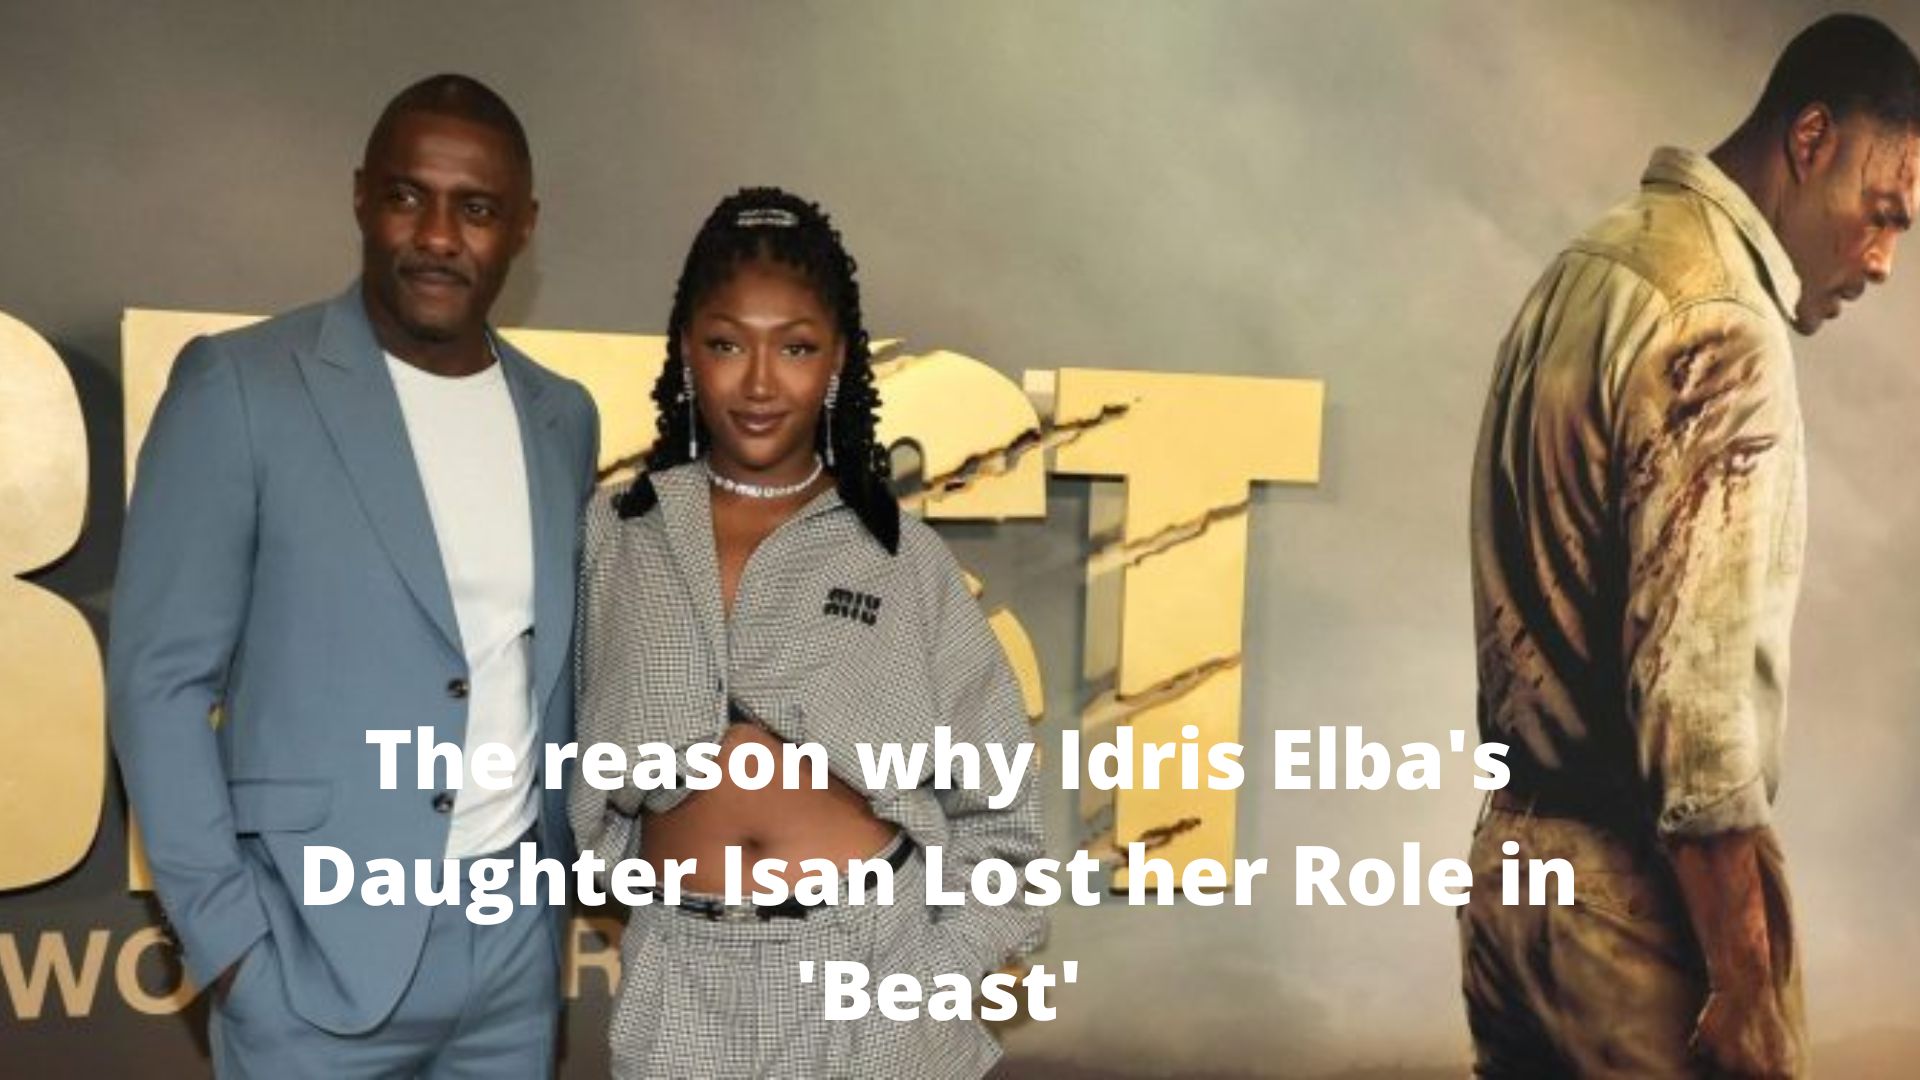 The reason why Idris Elba's Daughter Isan Lost her Role in 'Beast'